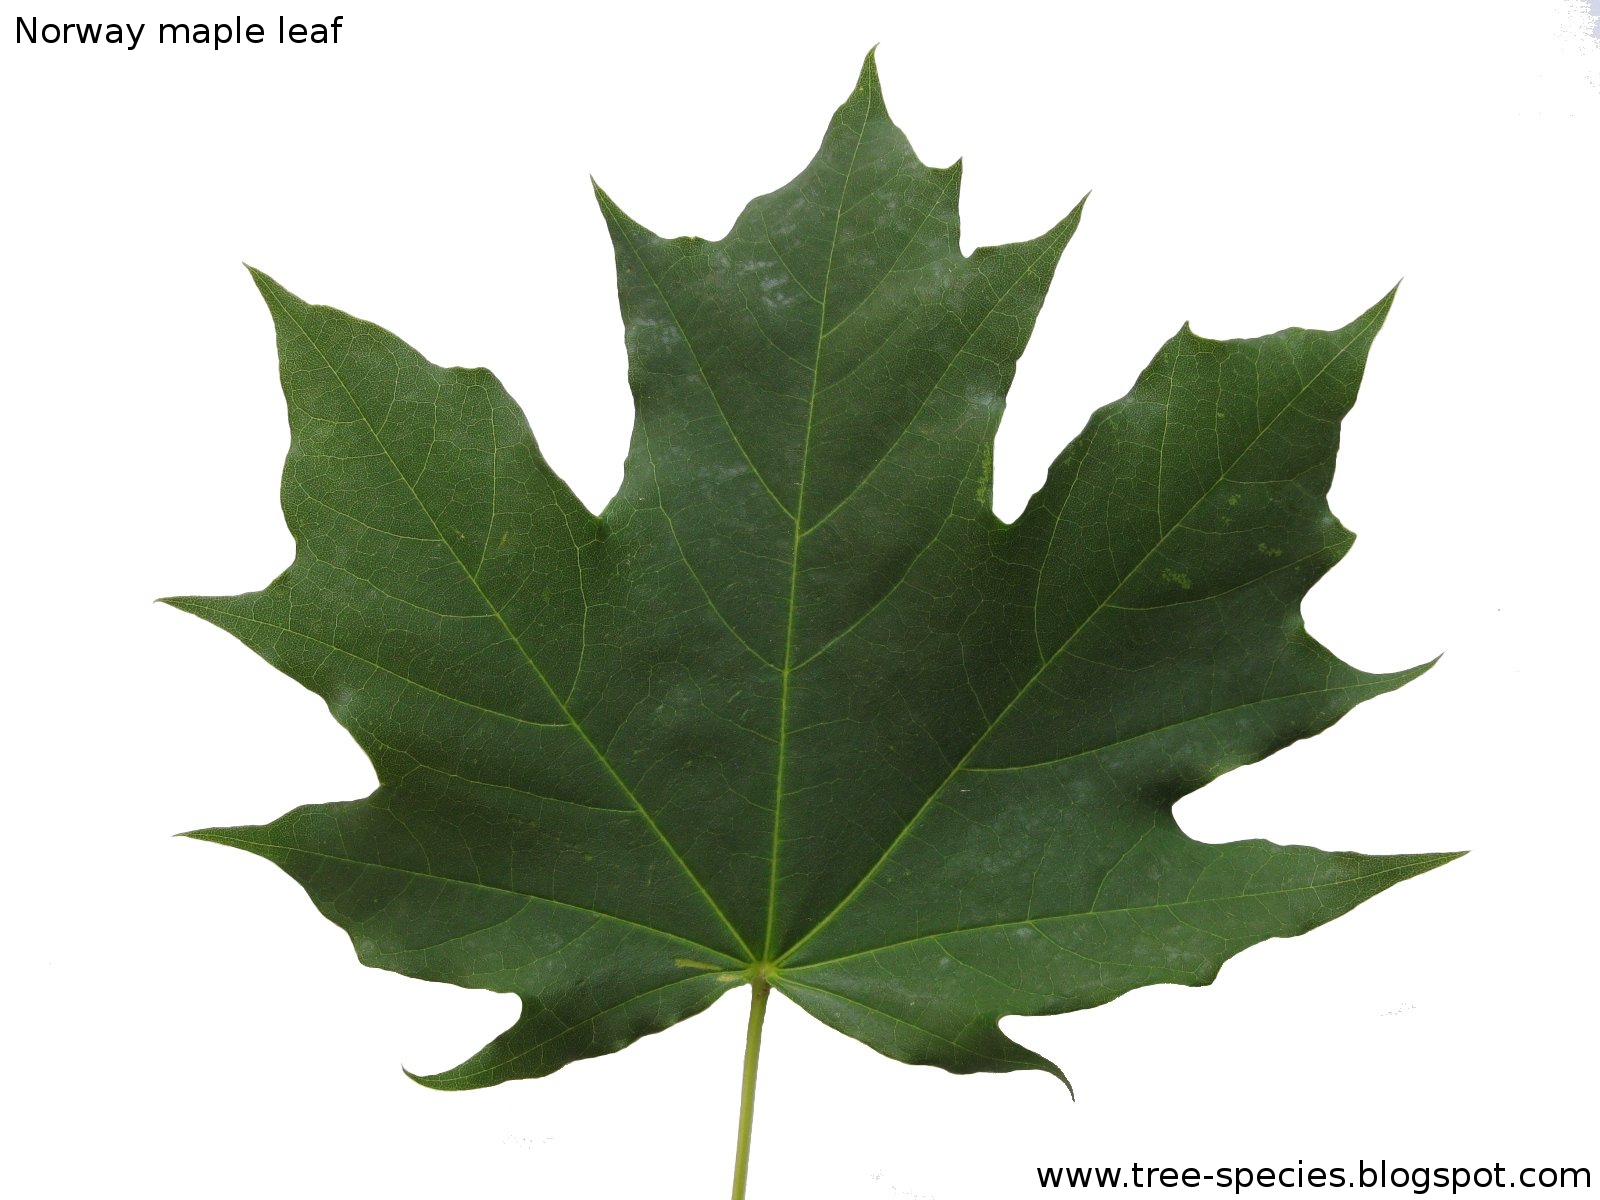 The World?s Tree Species: Norway maple leaf